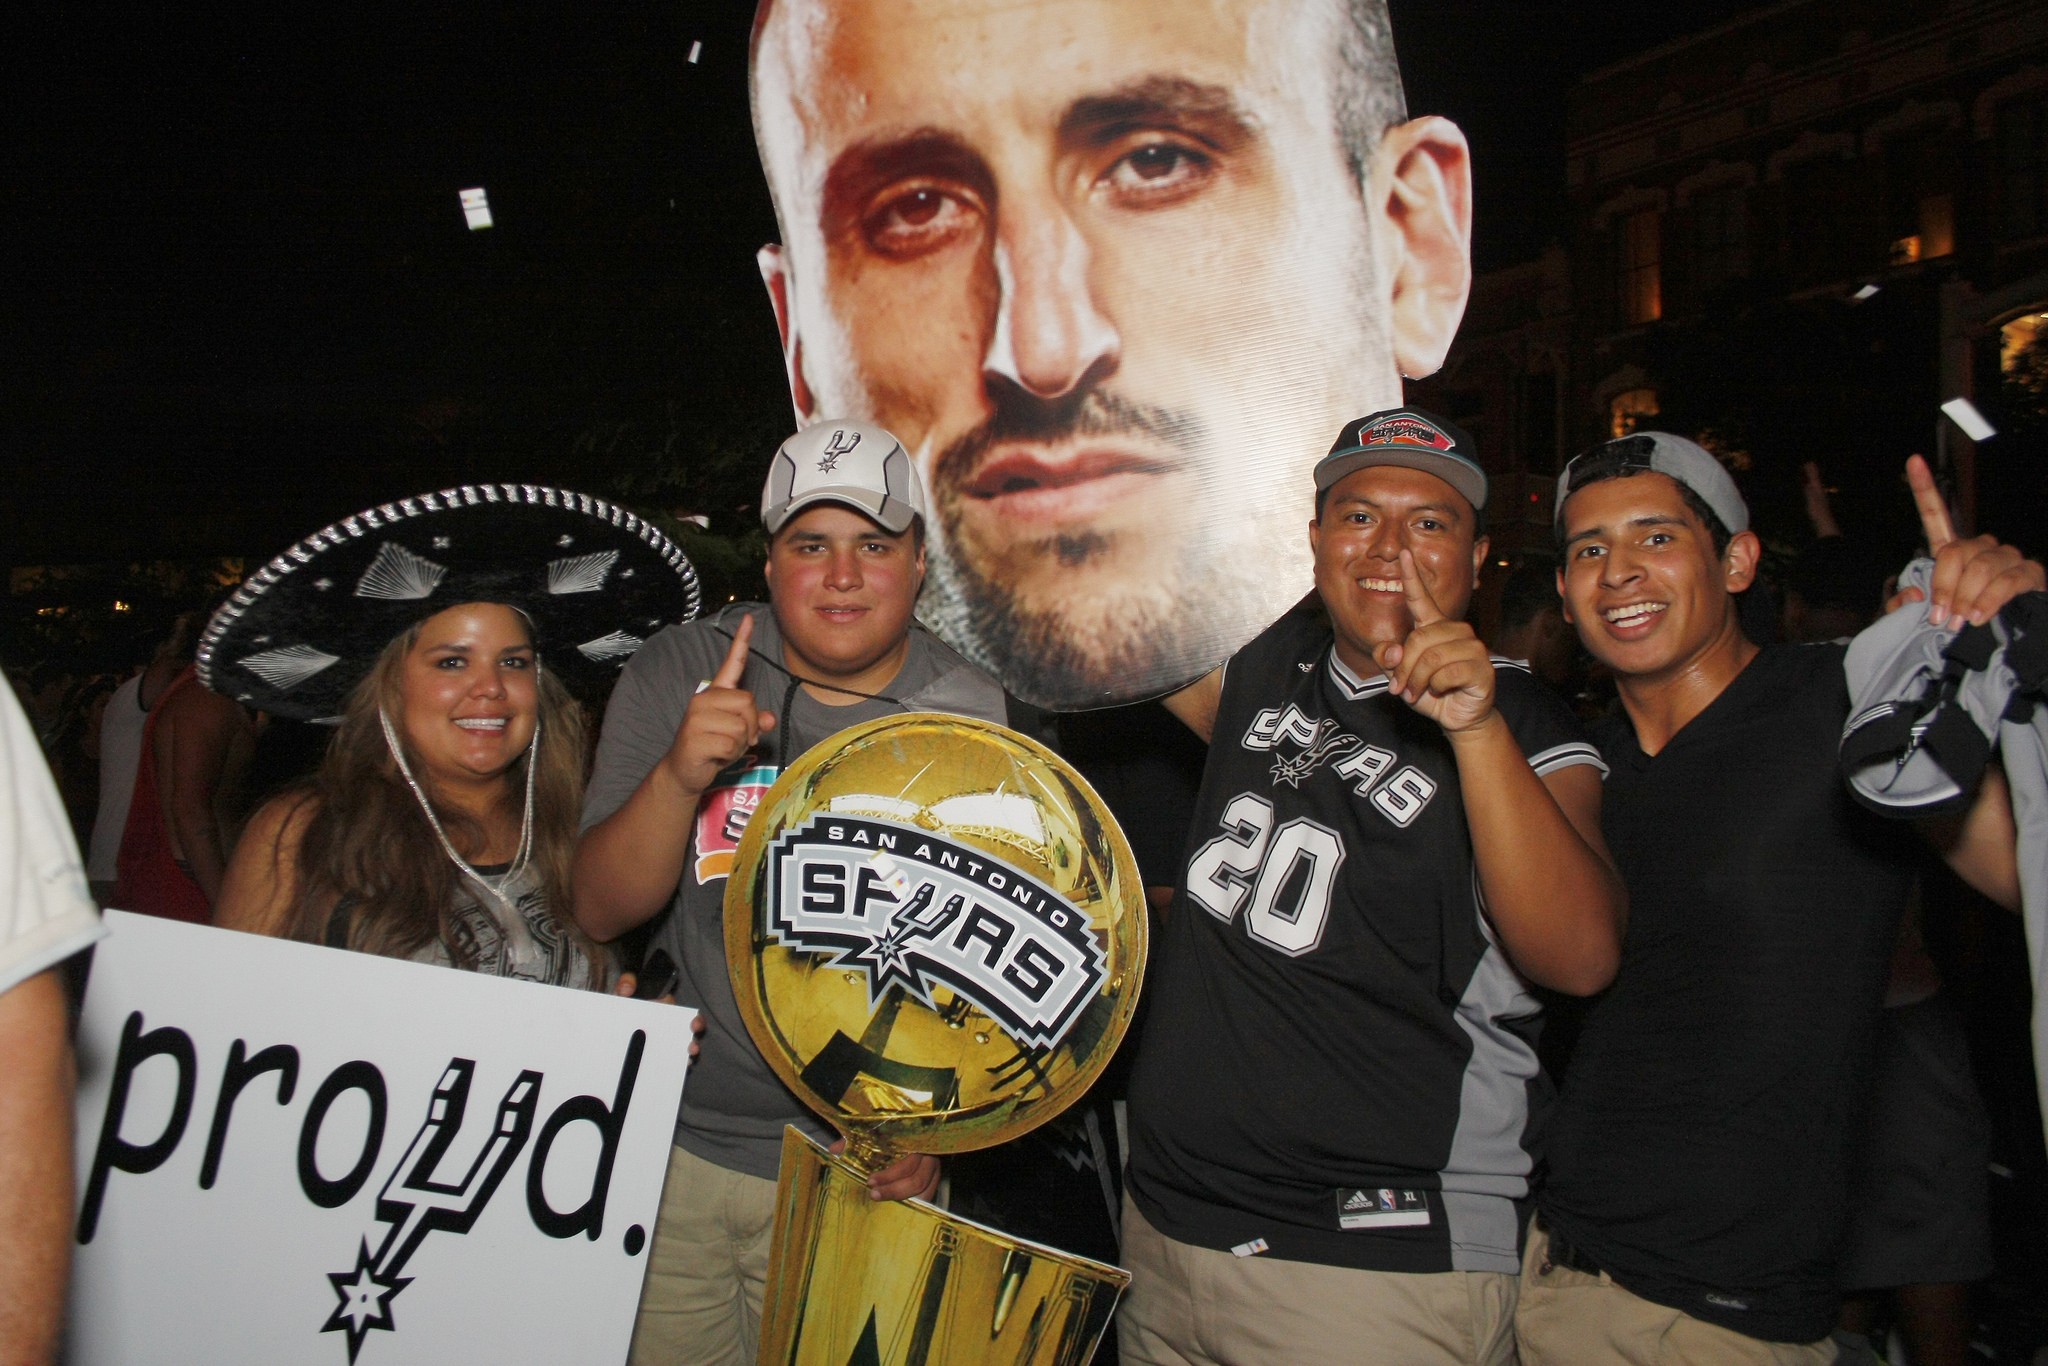 U.K. Spurs fan asks for the best things to do in San Antonio